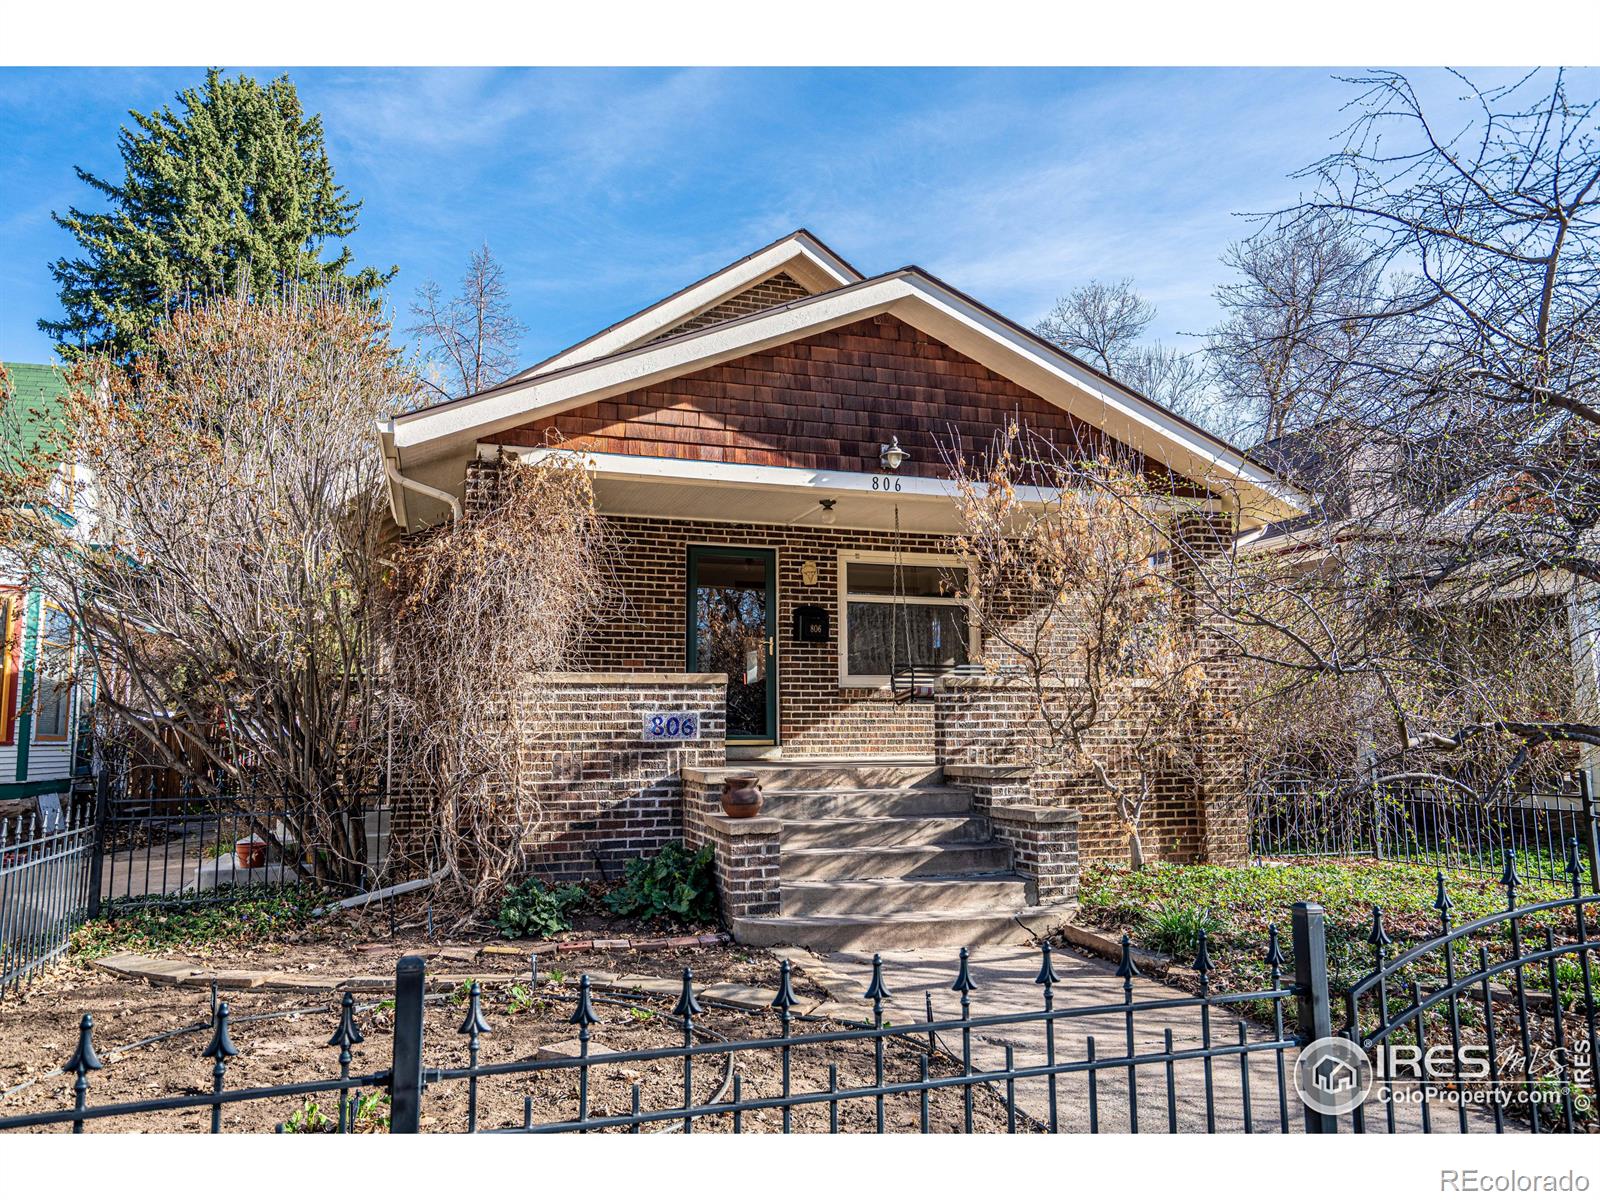 806 W Mountain Avenue, fort collins MLS: 4567891006368 Beds: 5 Baths: 2 Price: $800,000